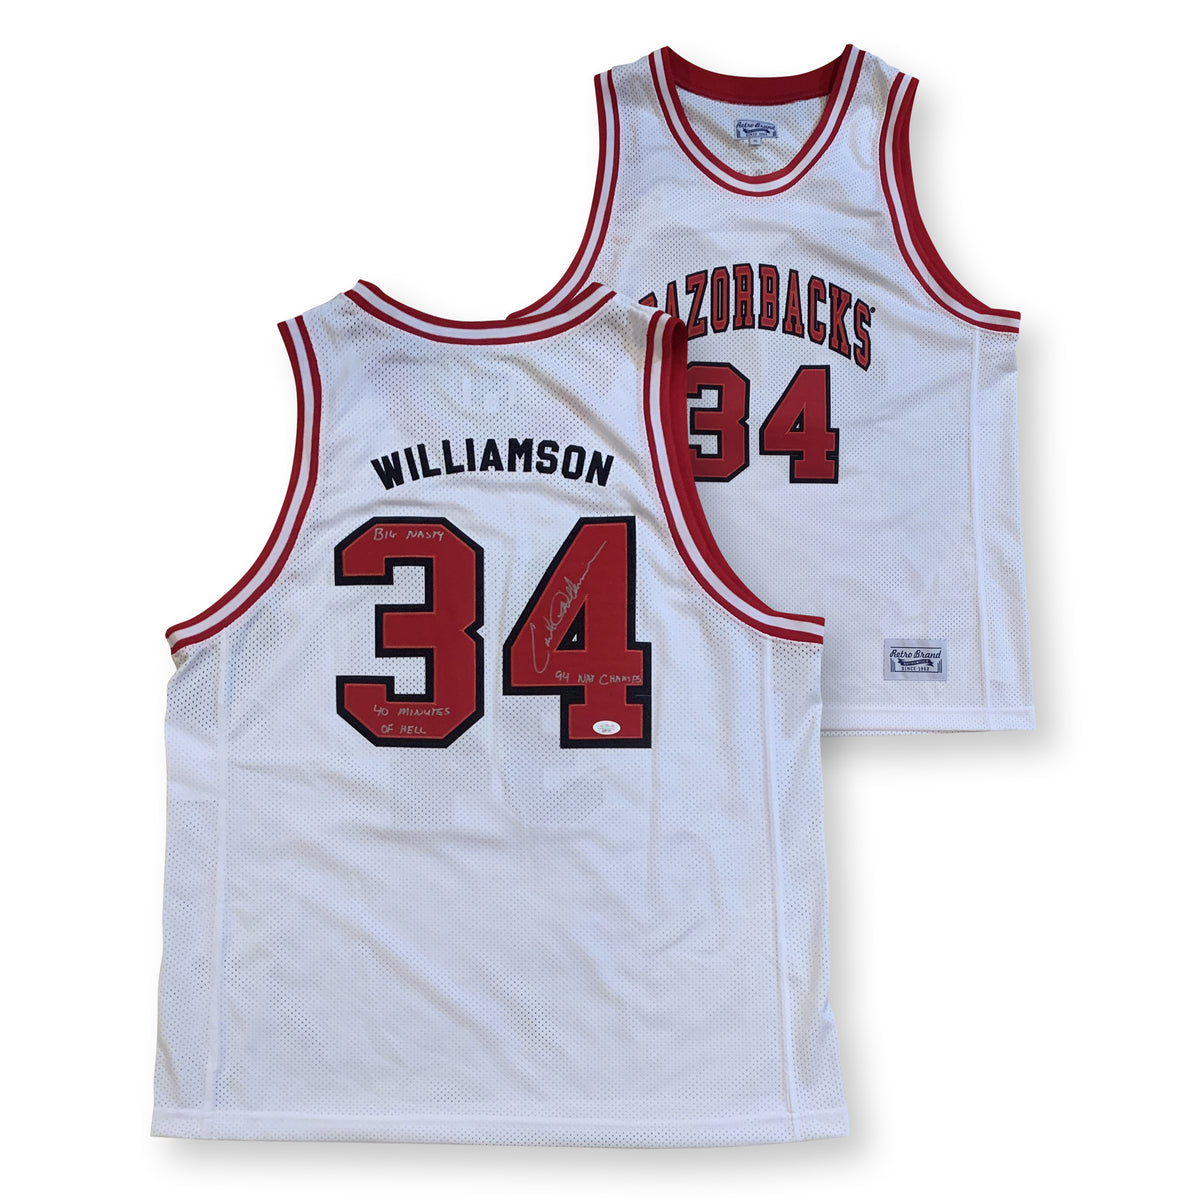 2014 Louisville Cardinals Team Signed Basketball Jersey w/COA Brand New  White at 's Sports Collectibles Store